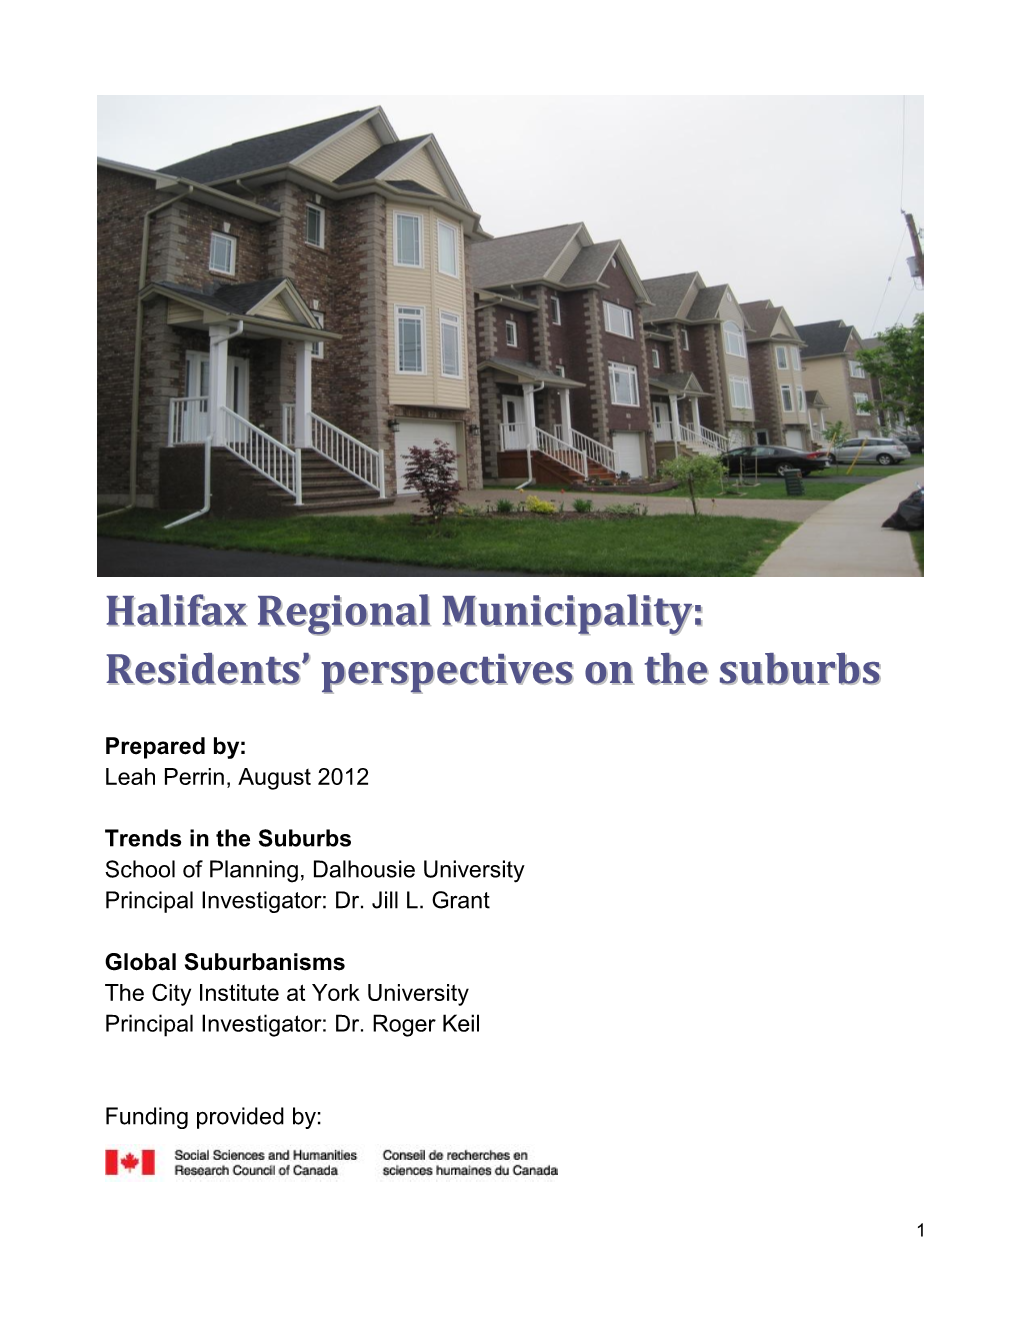 Halifax Regional Municipality: Residents' Perspectives on The